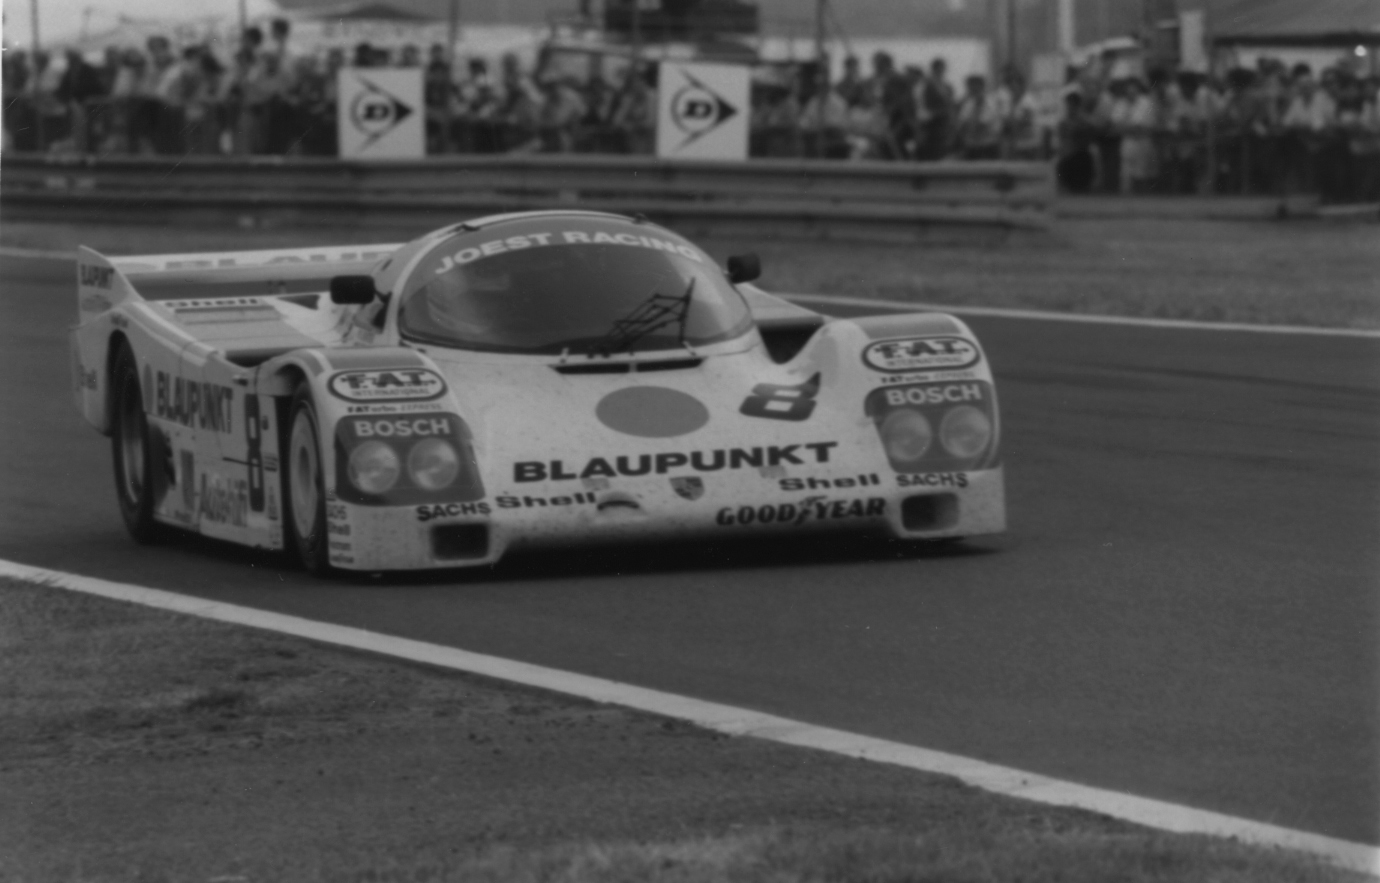 Krages liked to say he was the one who had most often driven the Porsche 956/962C! He knew the prototype like the back of his hand.